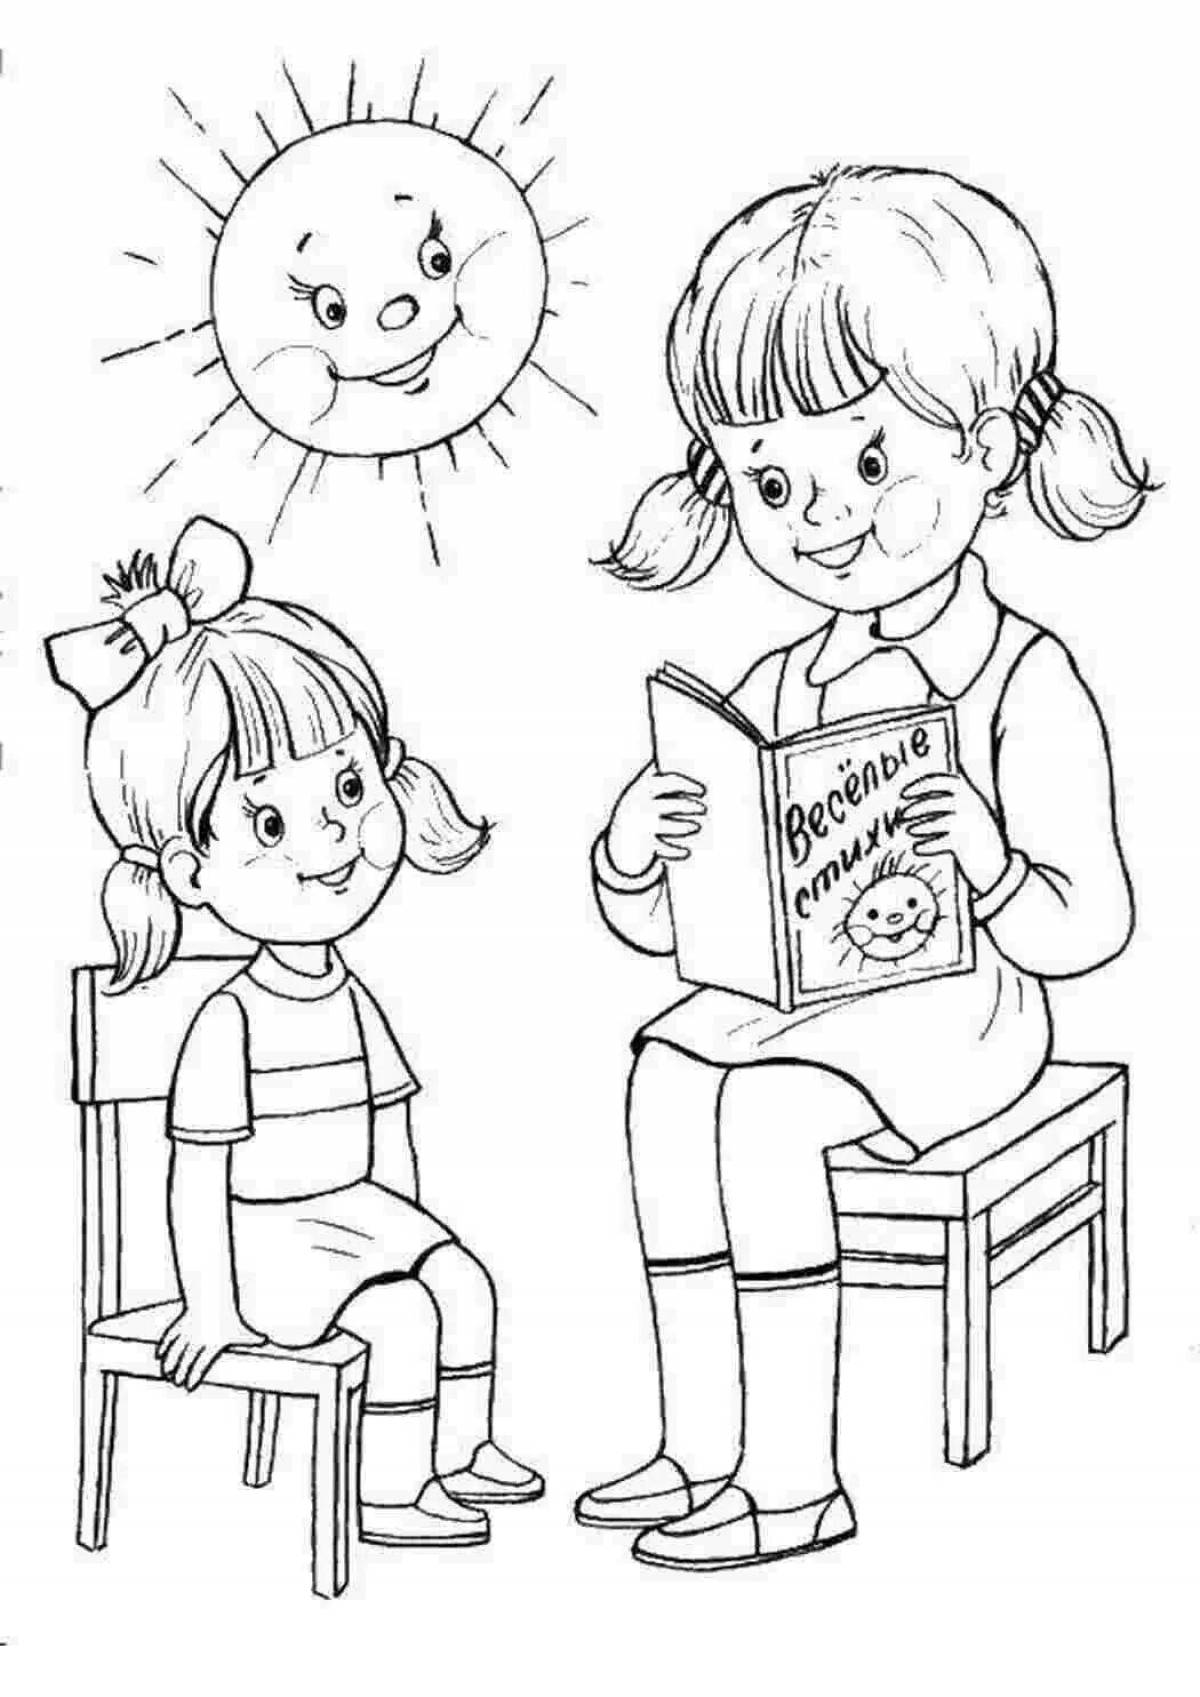 Comic good deeds coloring page